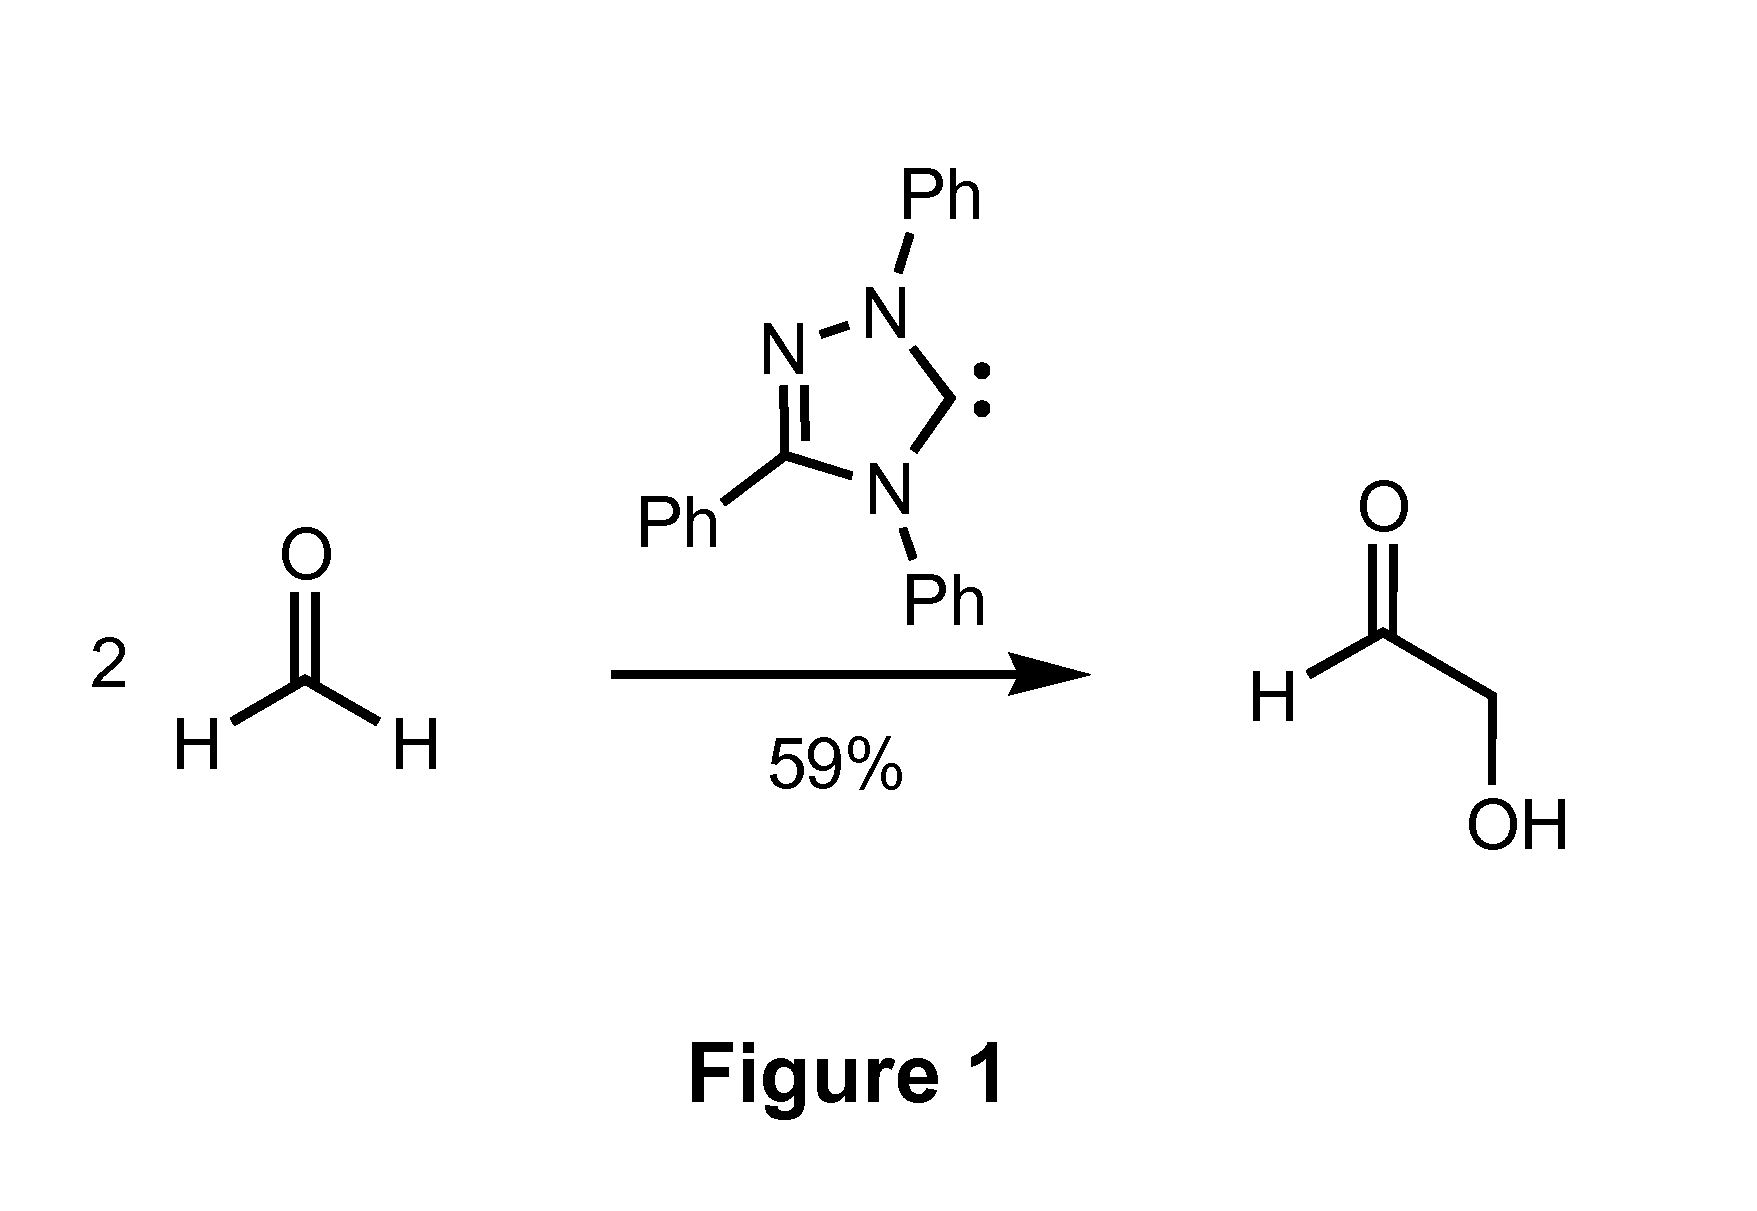 Combined Formose/Transfer Hydrogenation Process for Ethylene Glycol Synthesis